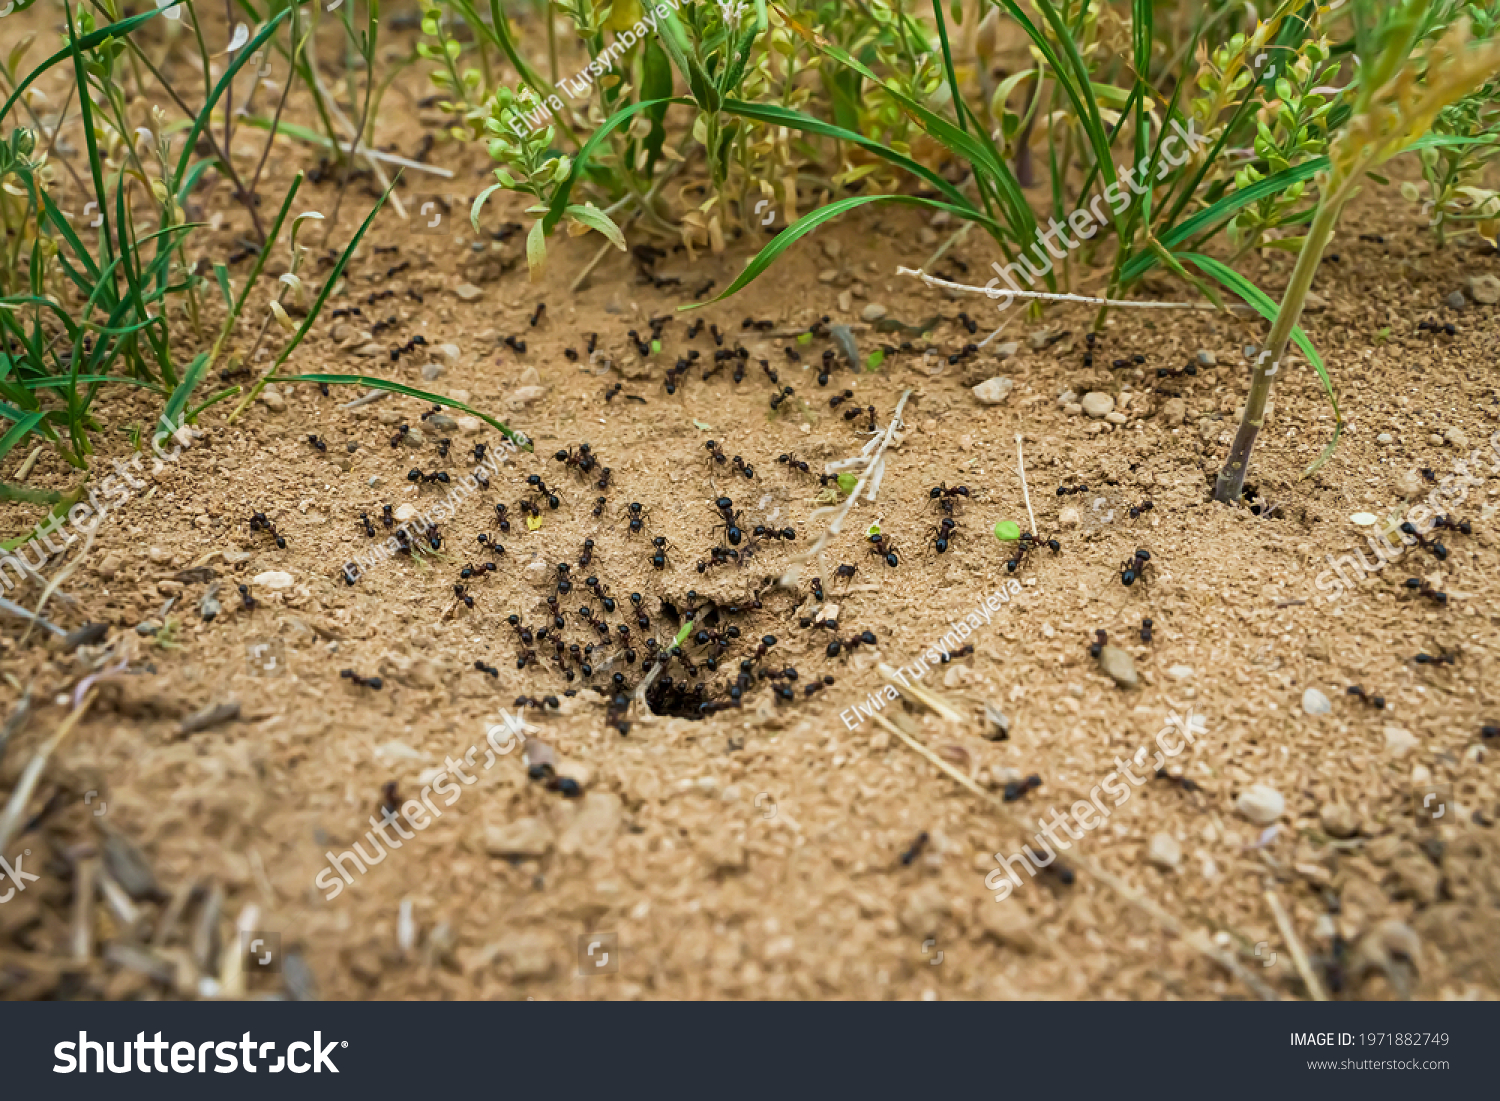 Ants close-up. Ants family. Little black ants are at work. Ants with prey at the entrance to the termite mound. Clay and small stones texture. Mink in the ground. Green grass near termite mound #1971882749